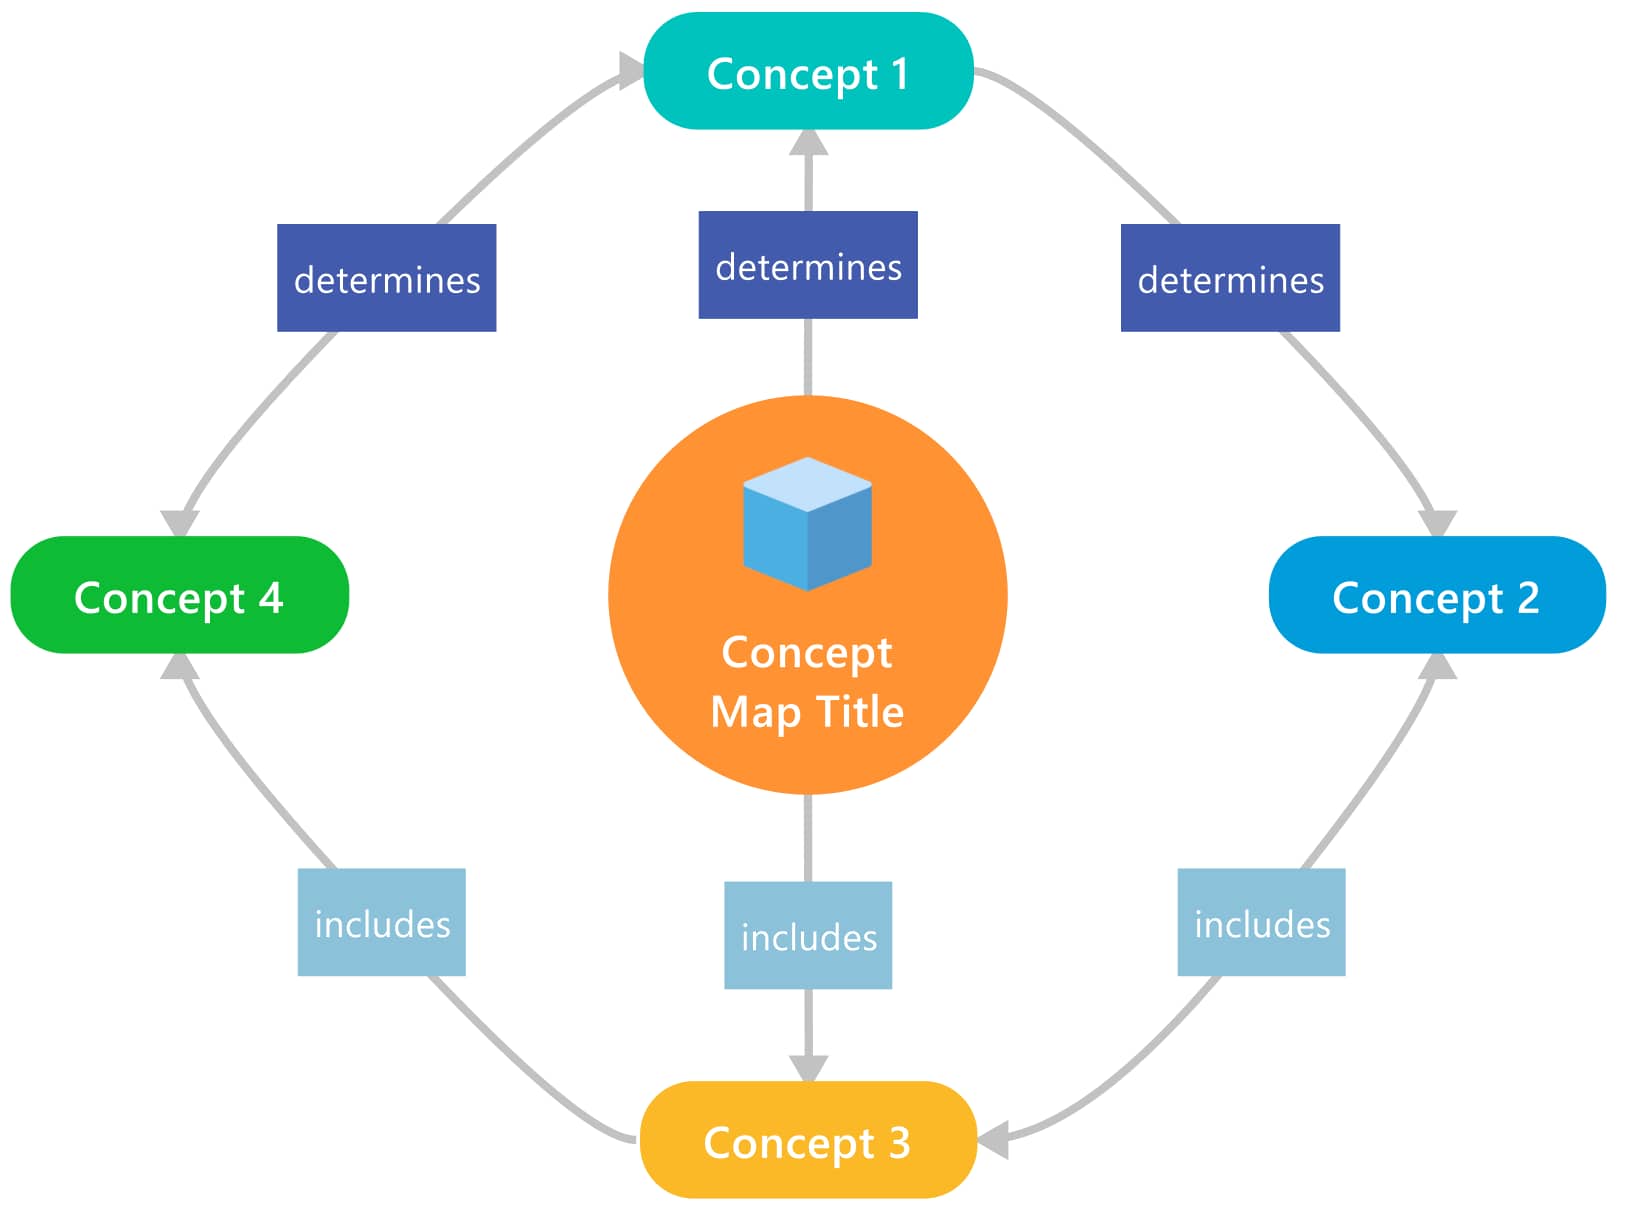 https://www.mindmanager.com/static/mm/images/features/concept-map/hero.png